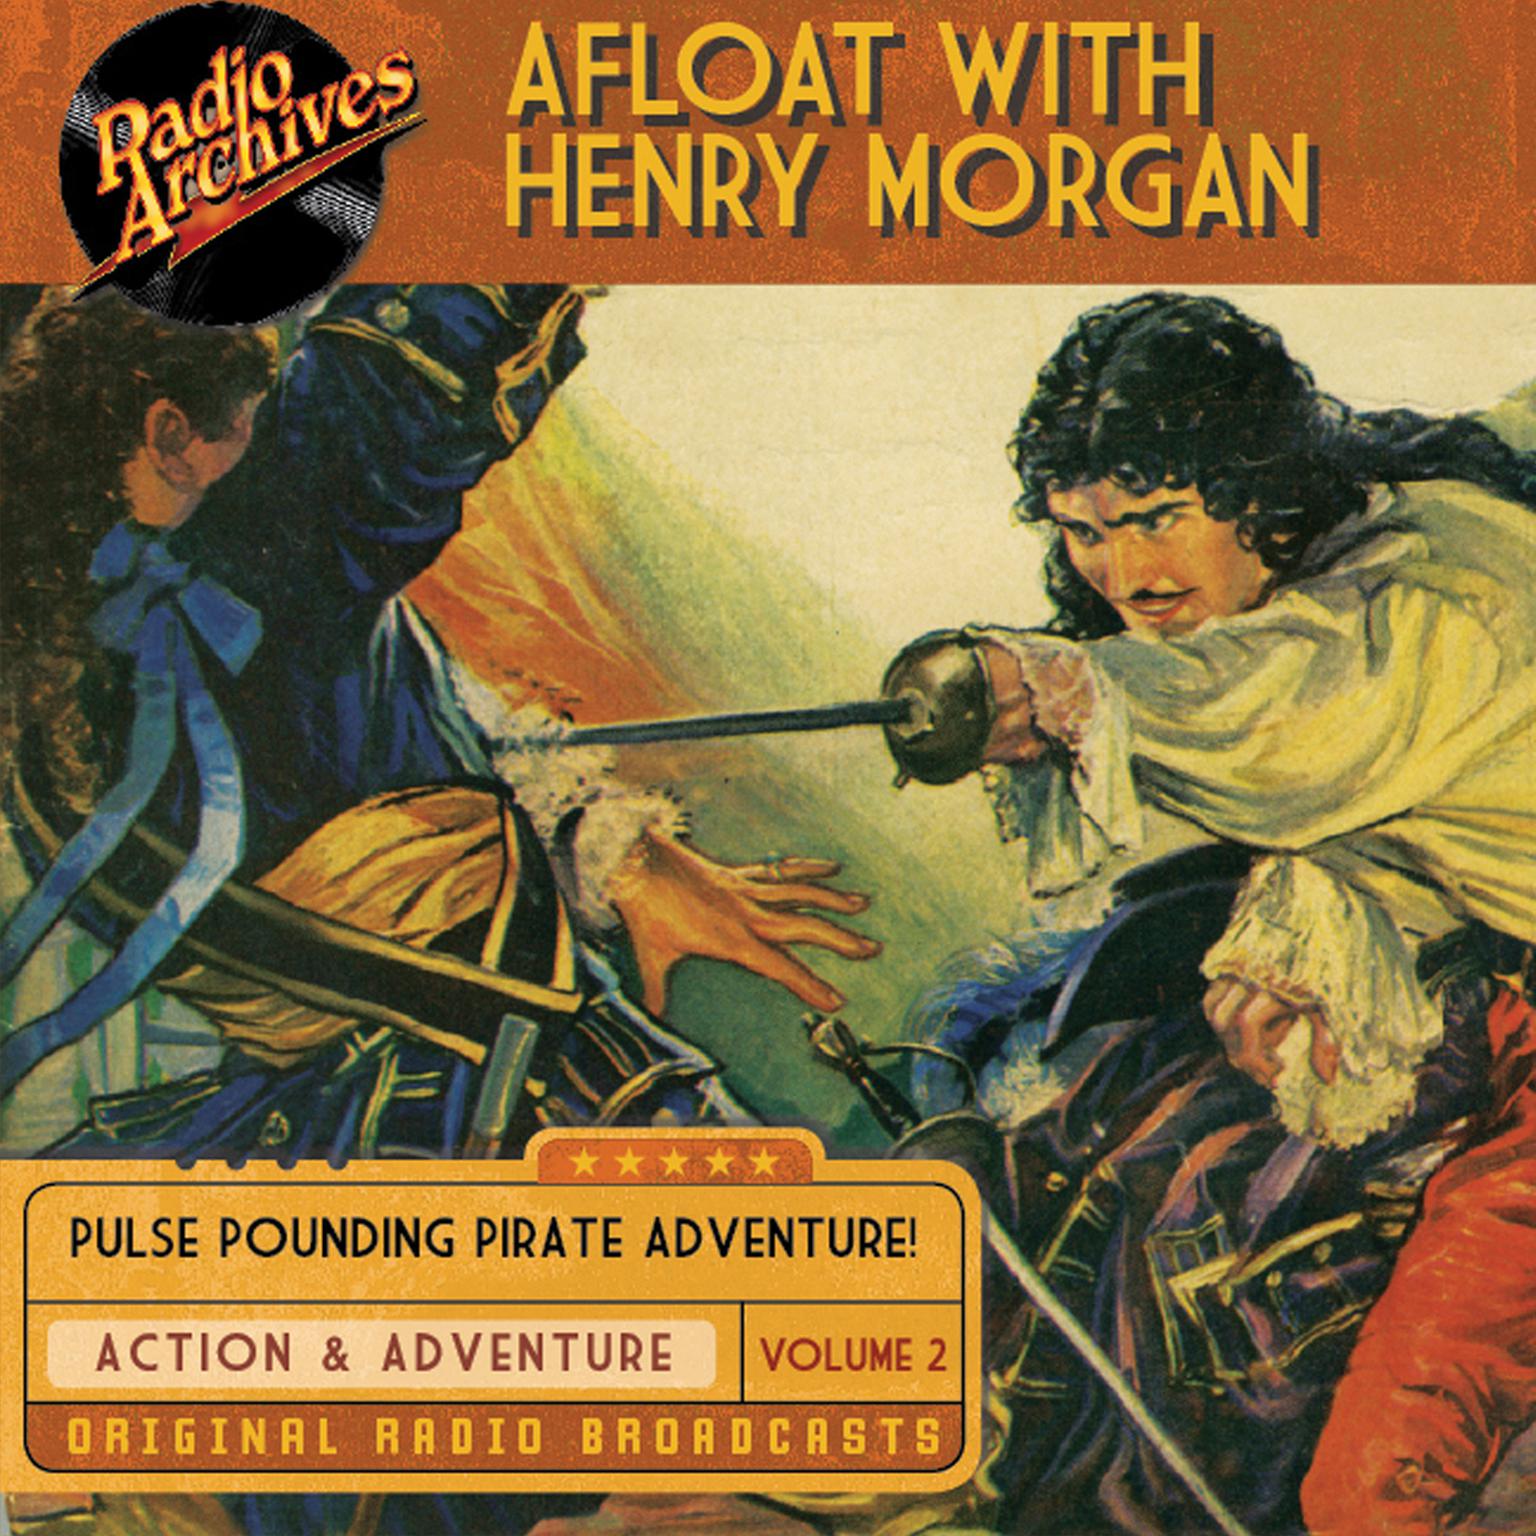 Afloat with Henry Morgan, Volume 2 Audiobook, by Warren Barry